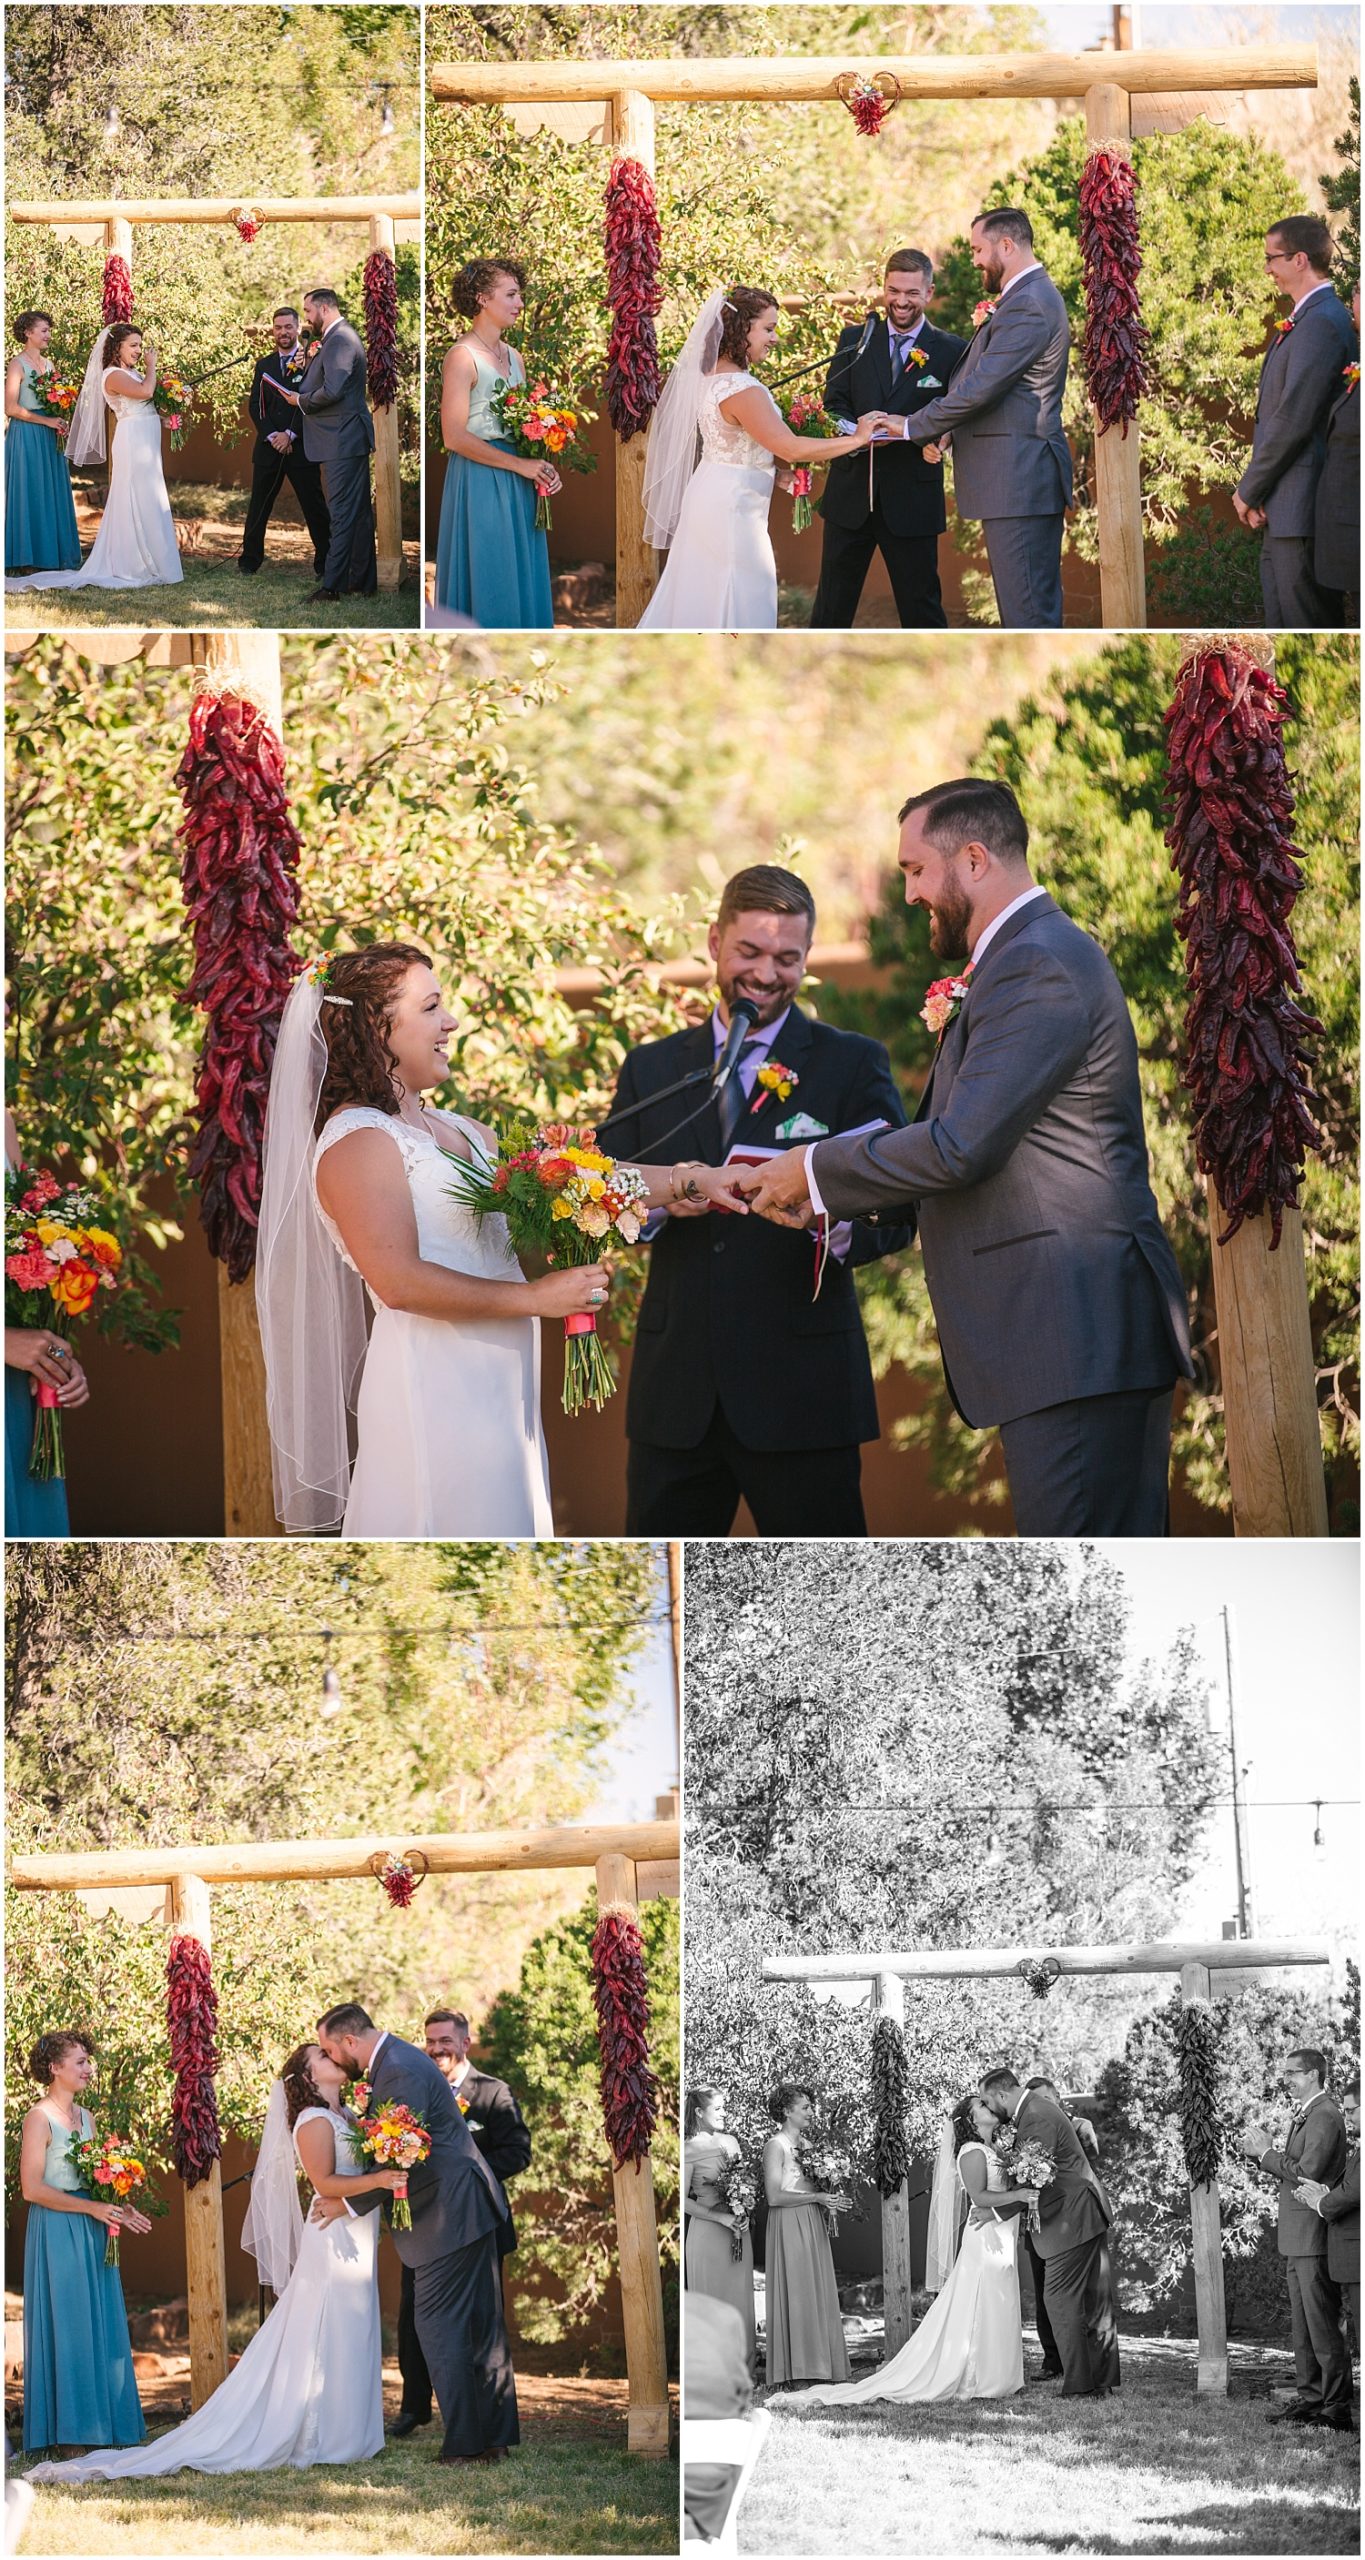 Bride and groom's first kiss at their intimate backyard wedding in Santa Fe